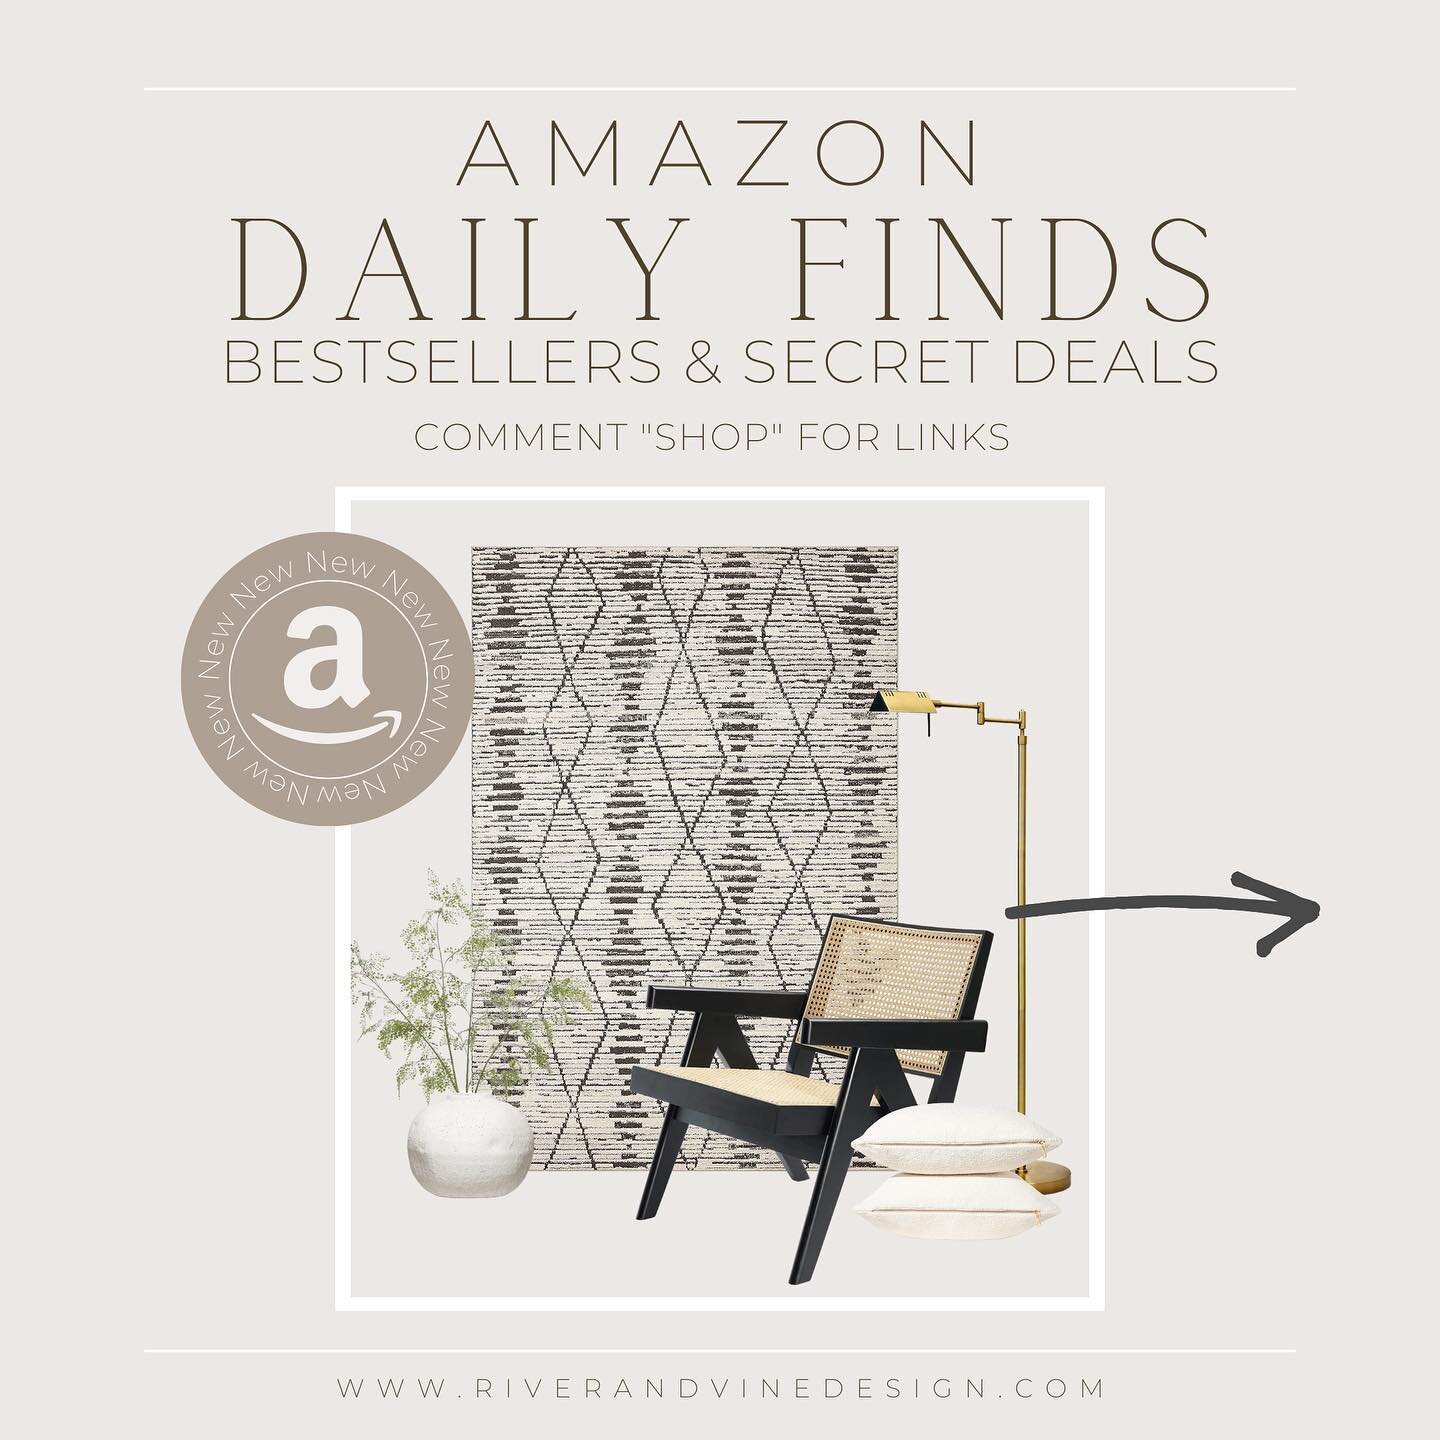 Comment &quot;Shop&quot; to score all of these amazing Amazon finds! Bestsellers and hidden gems
.
#amazonhome #amazondeals #amazonhomedecor #amazonfinds #budgetfriendly #dealsdealsdeals #amazonmusthaves